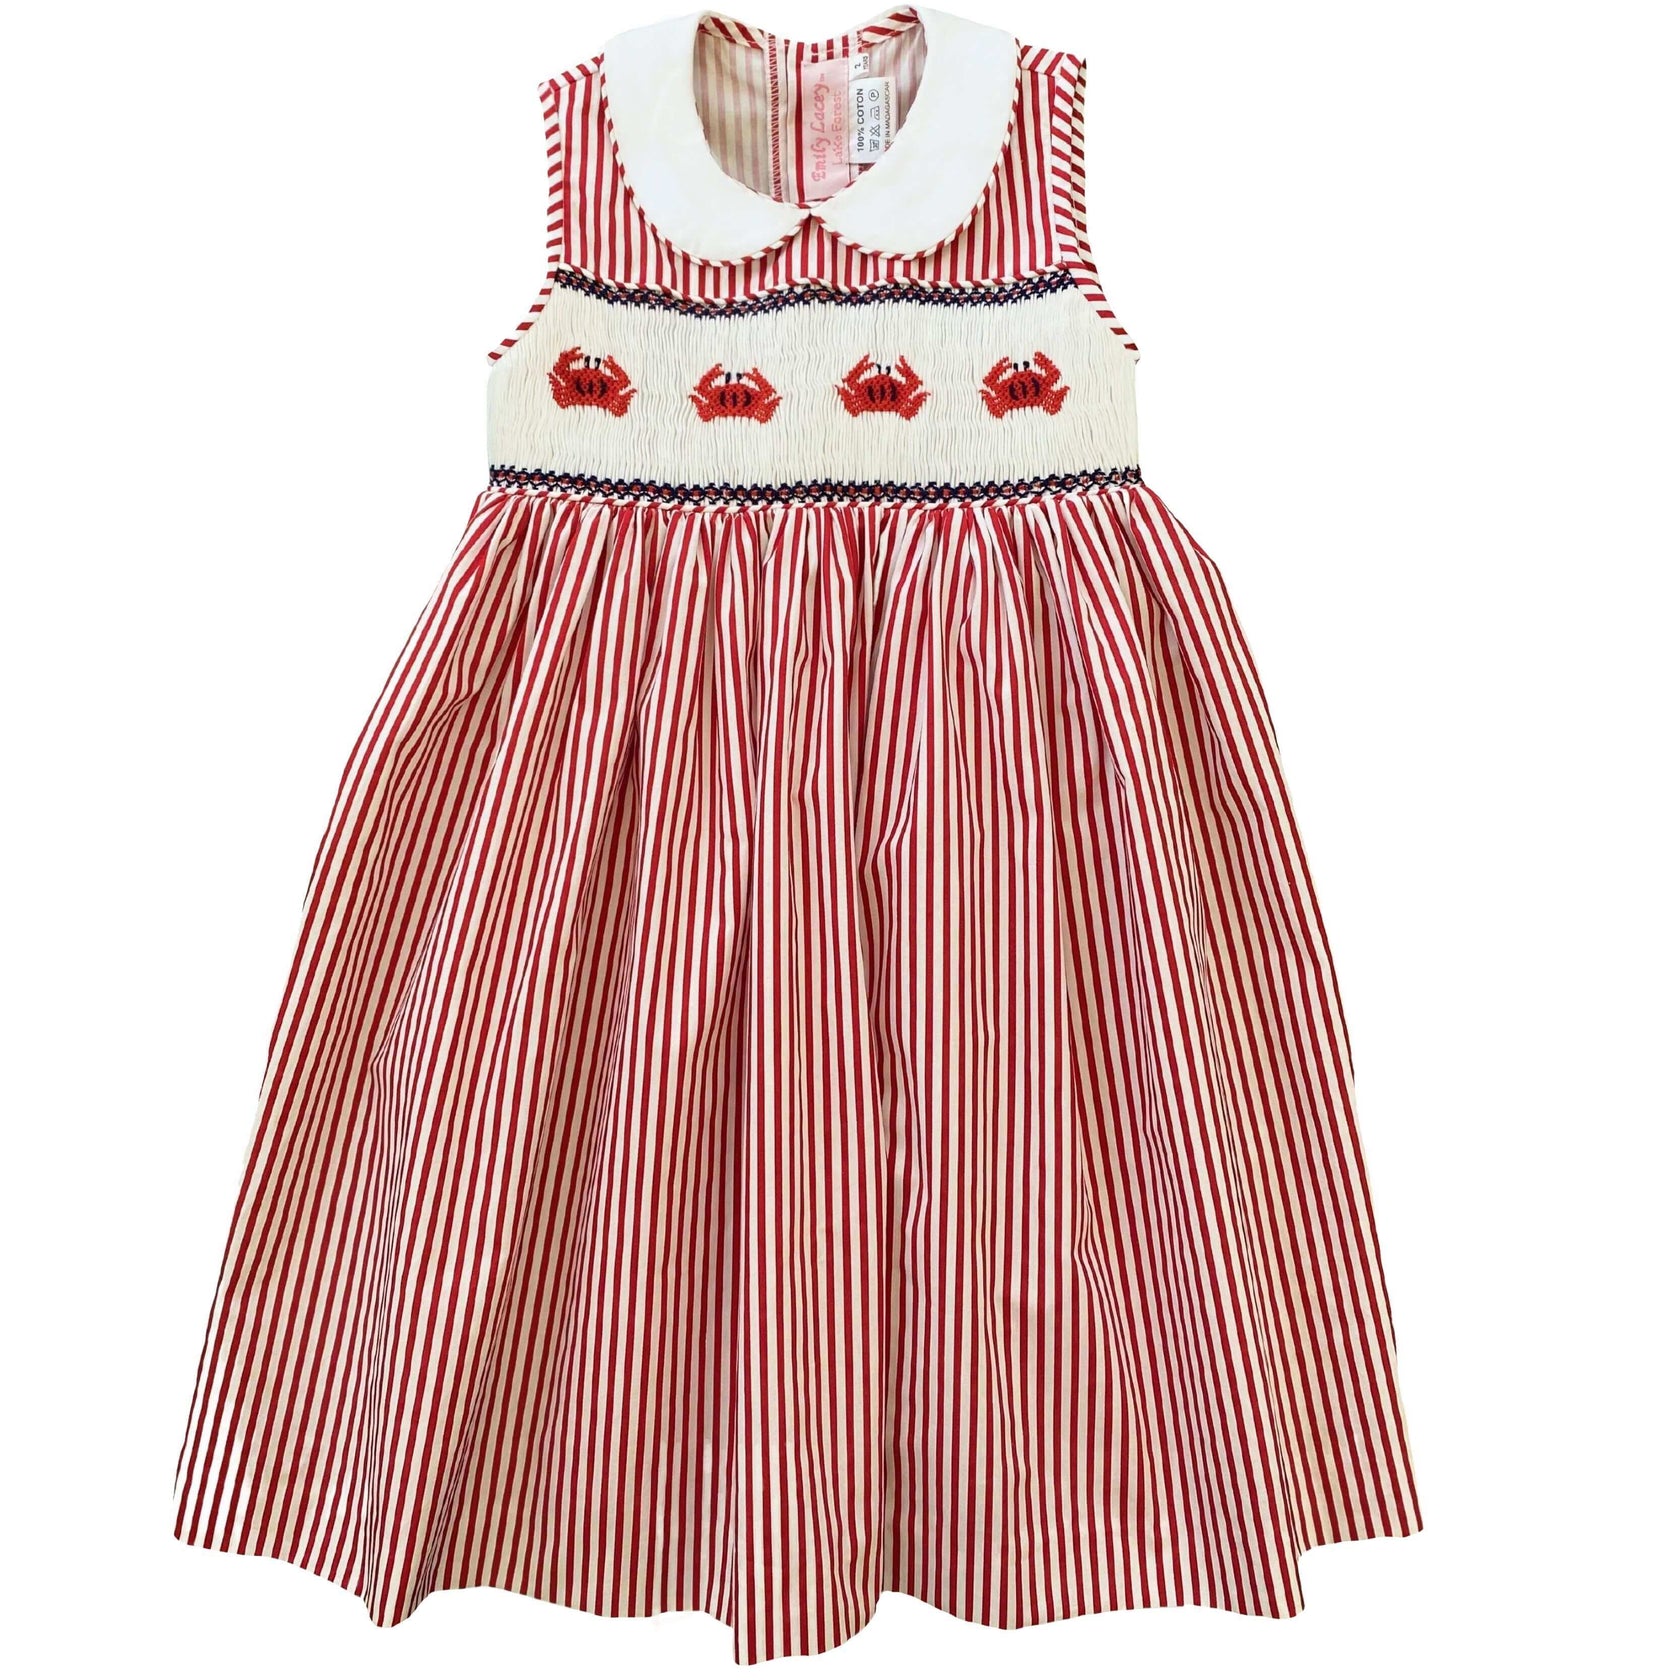 Cute Smocked Crab Dress for Kids - Shop Now!